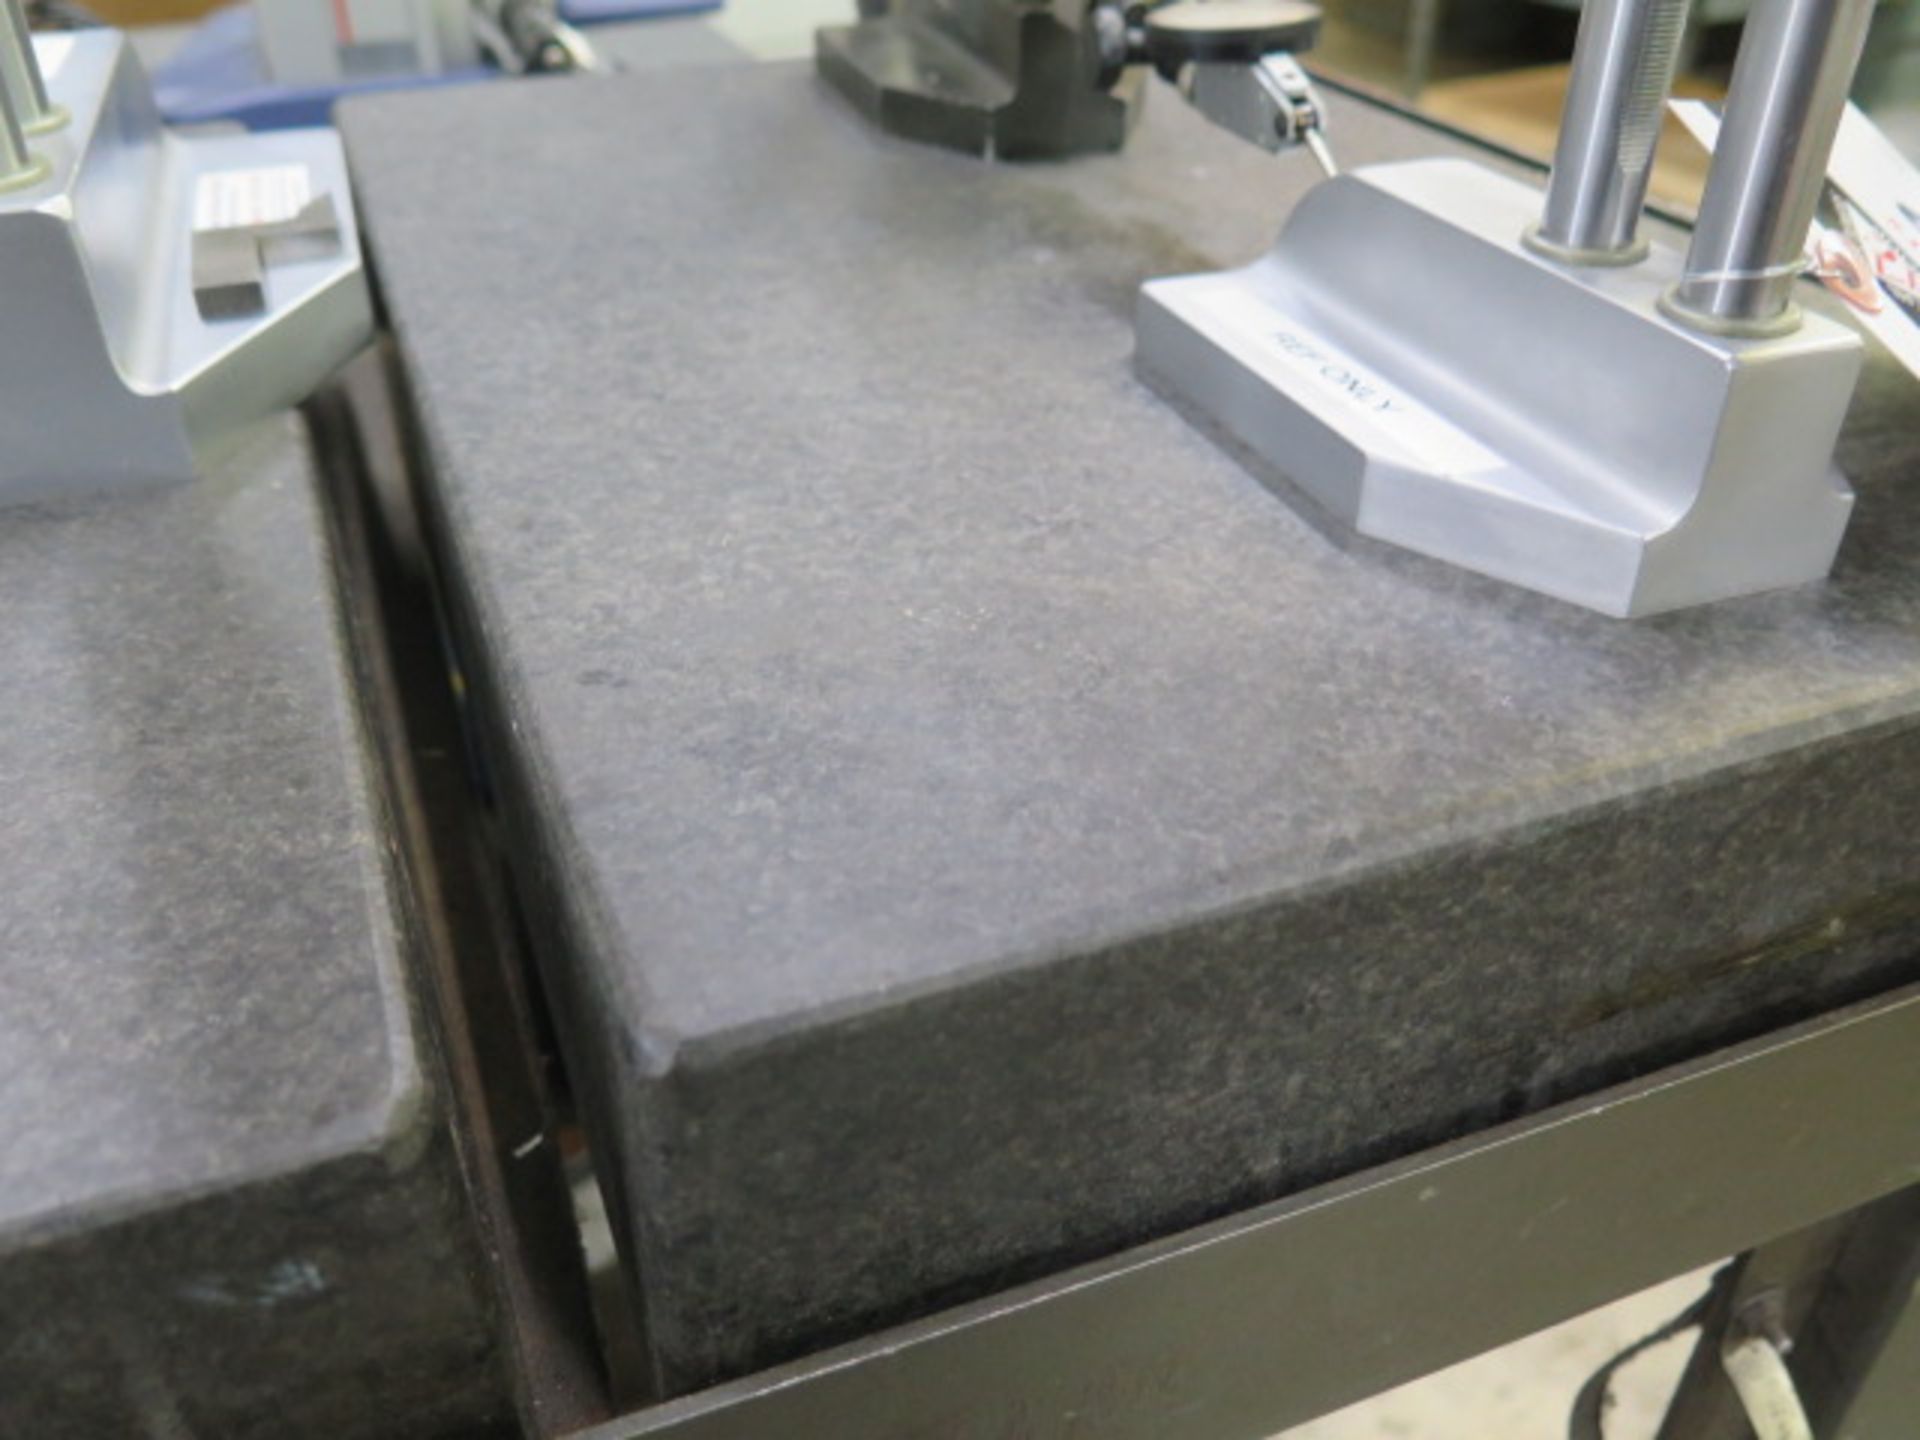 12" x 18' x 3" Granite Surface Plates (2) w/ Roll Stand (SOLD AS-IS - NO WARRANTY) - Image 3 of 4